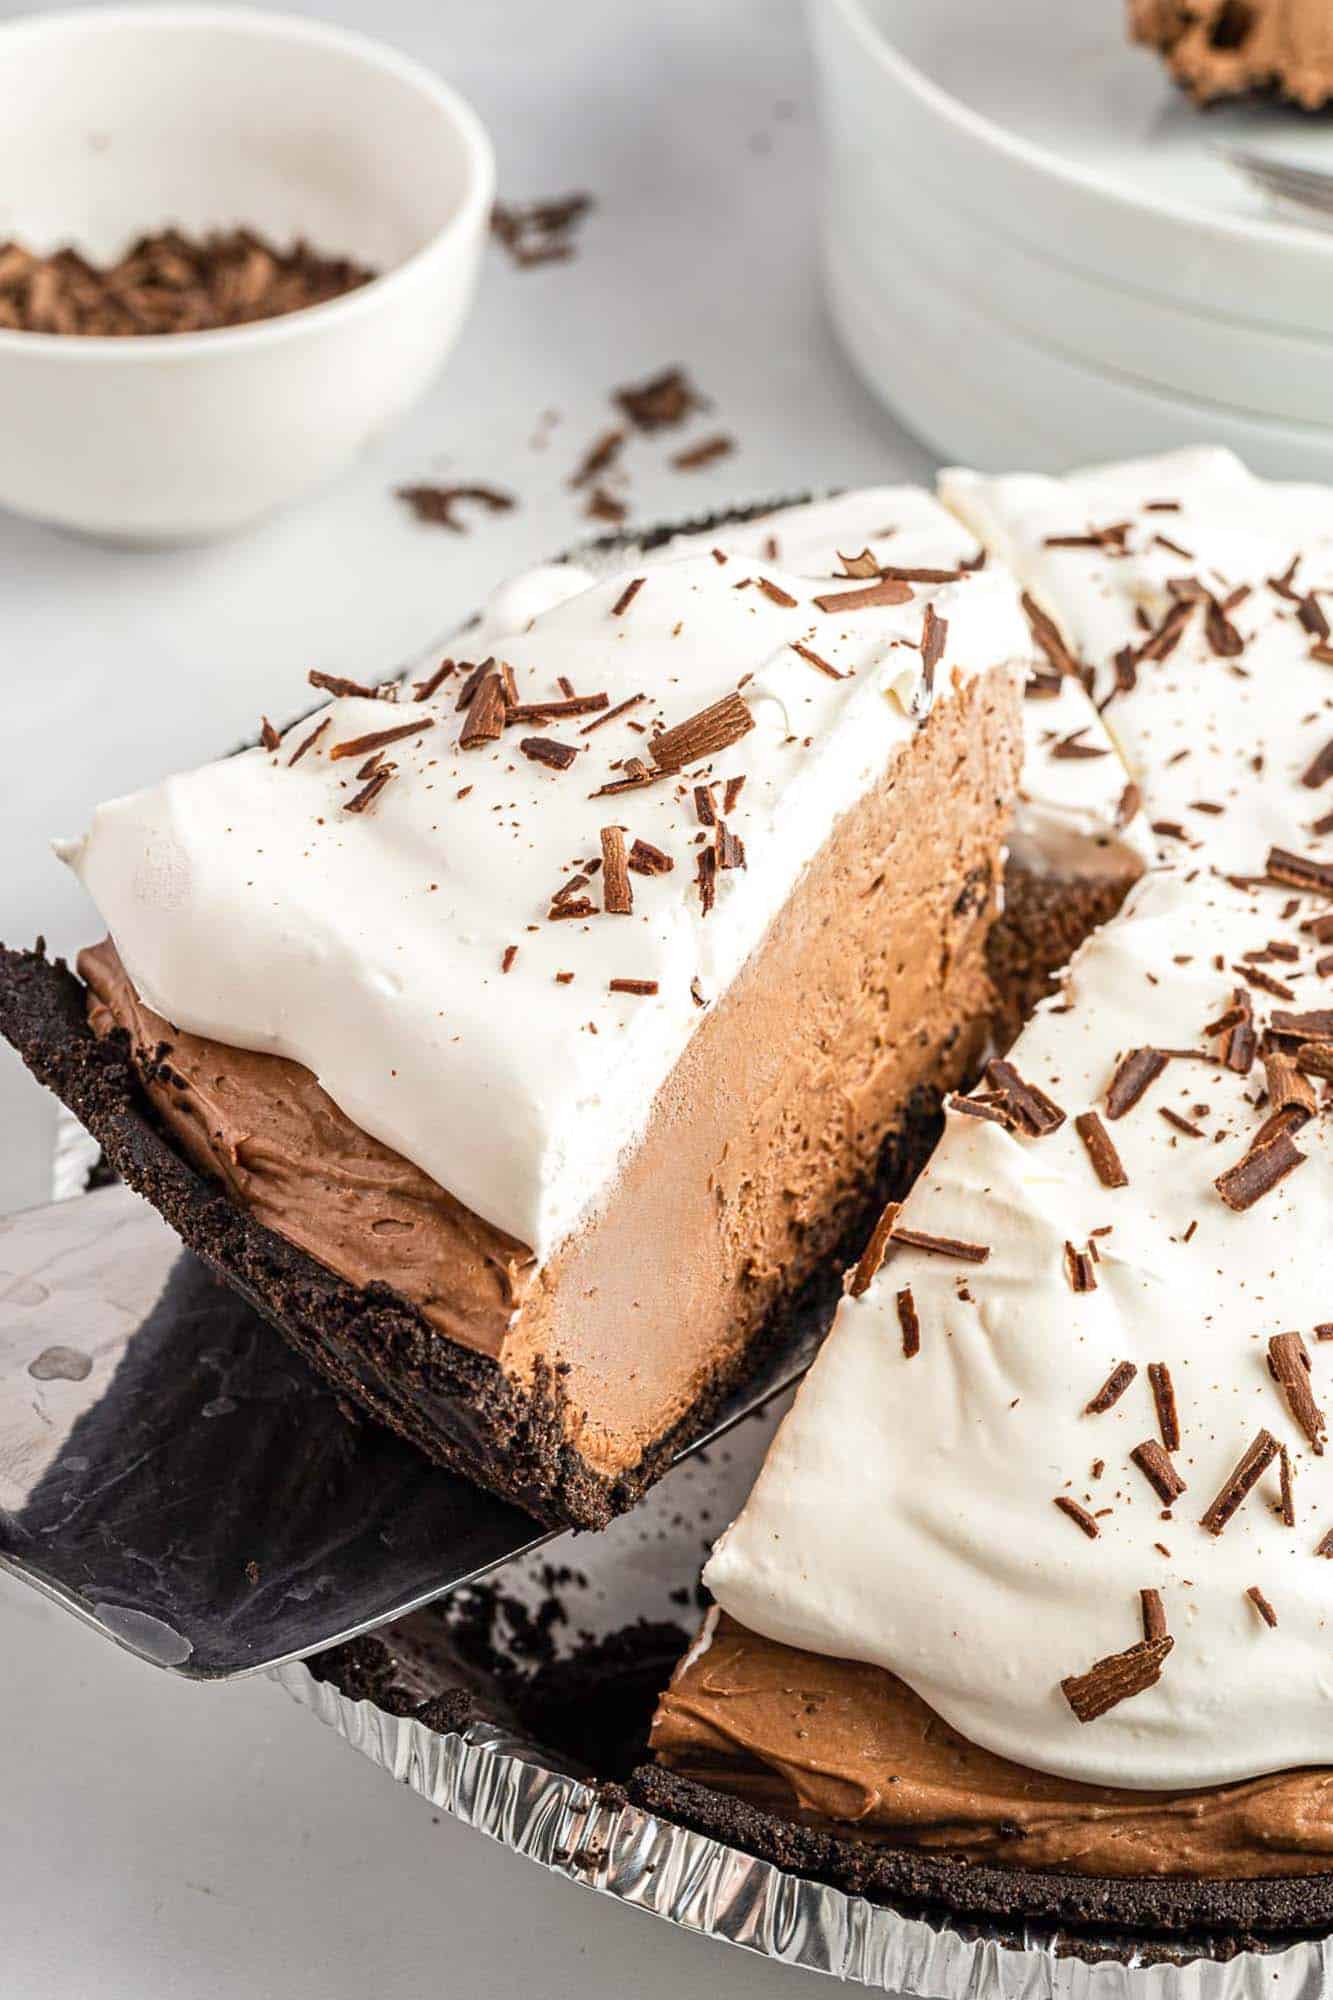 chocolate jello pudding pie with whipped topping. a slice is lifted up by a cake server